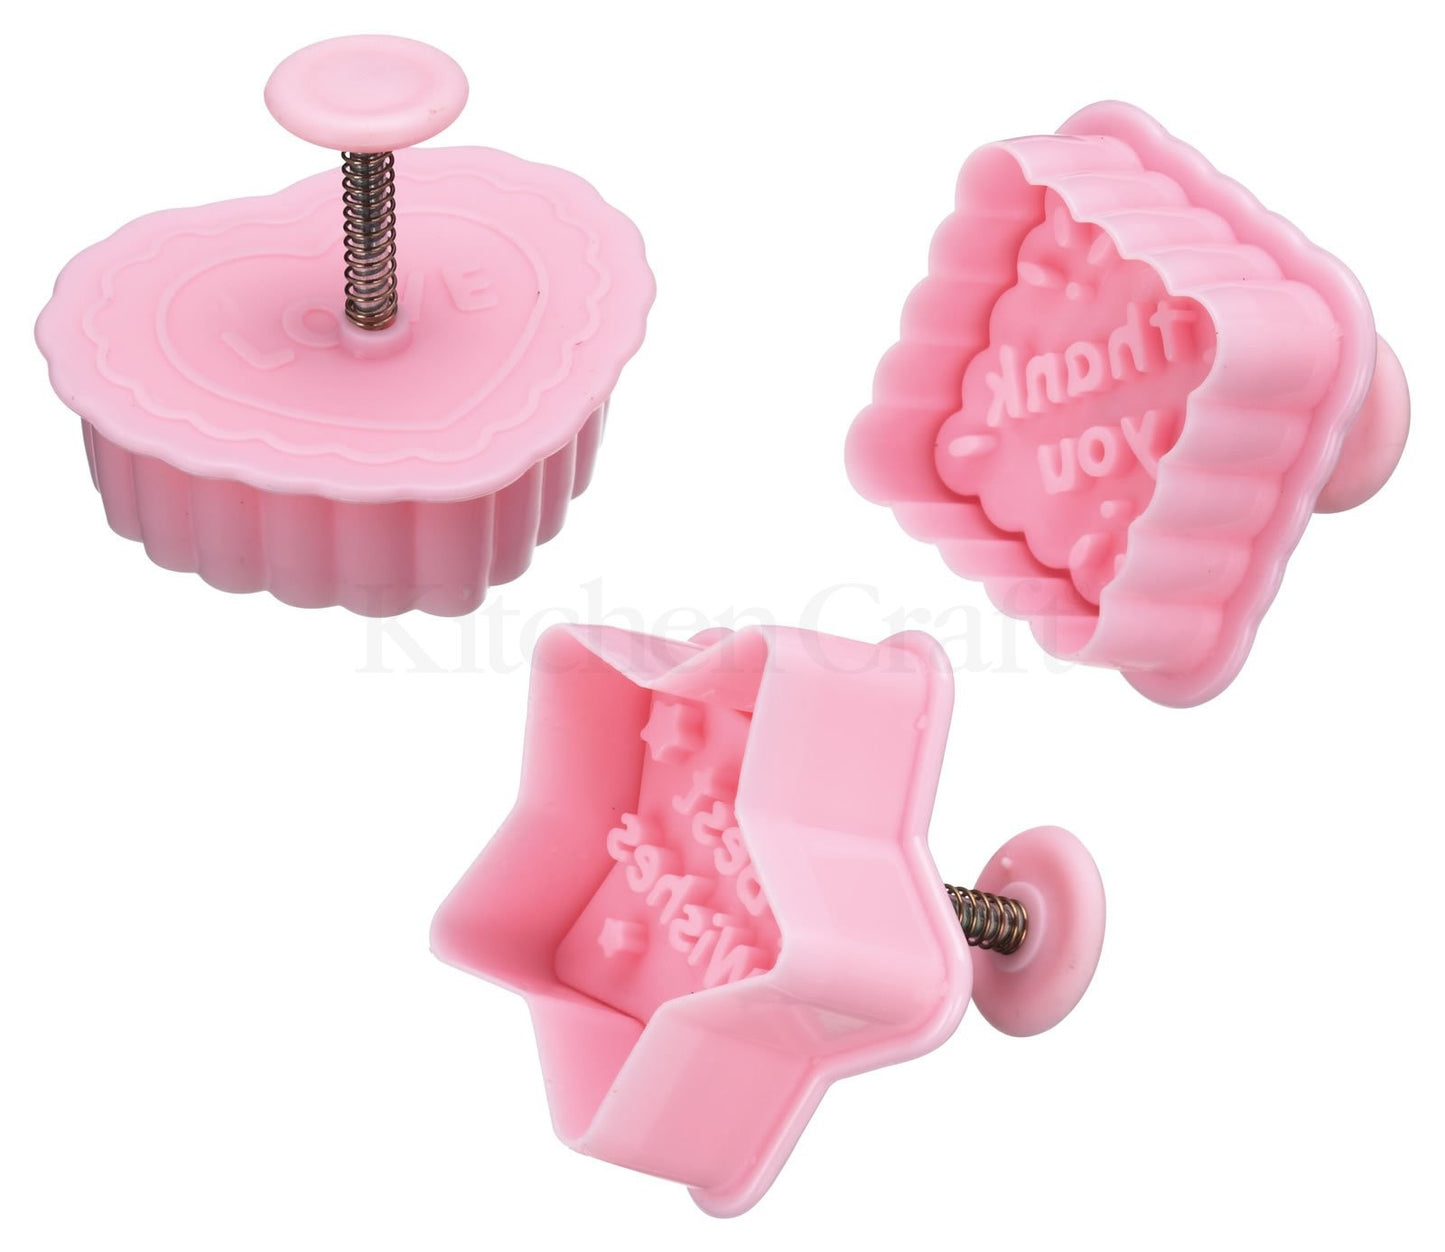 Sweetly Doesit message plunger cutter set 3